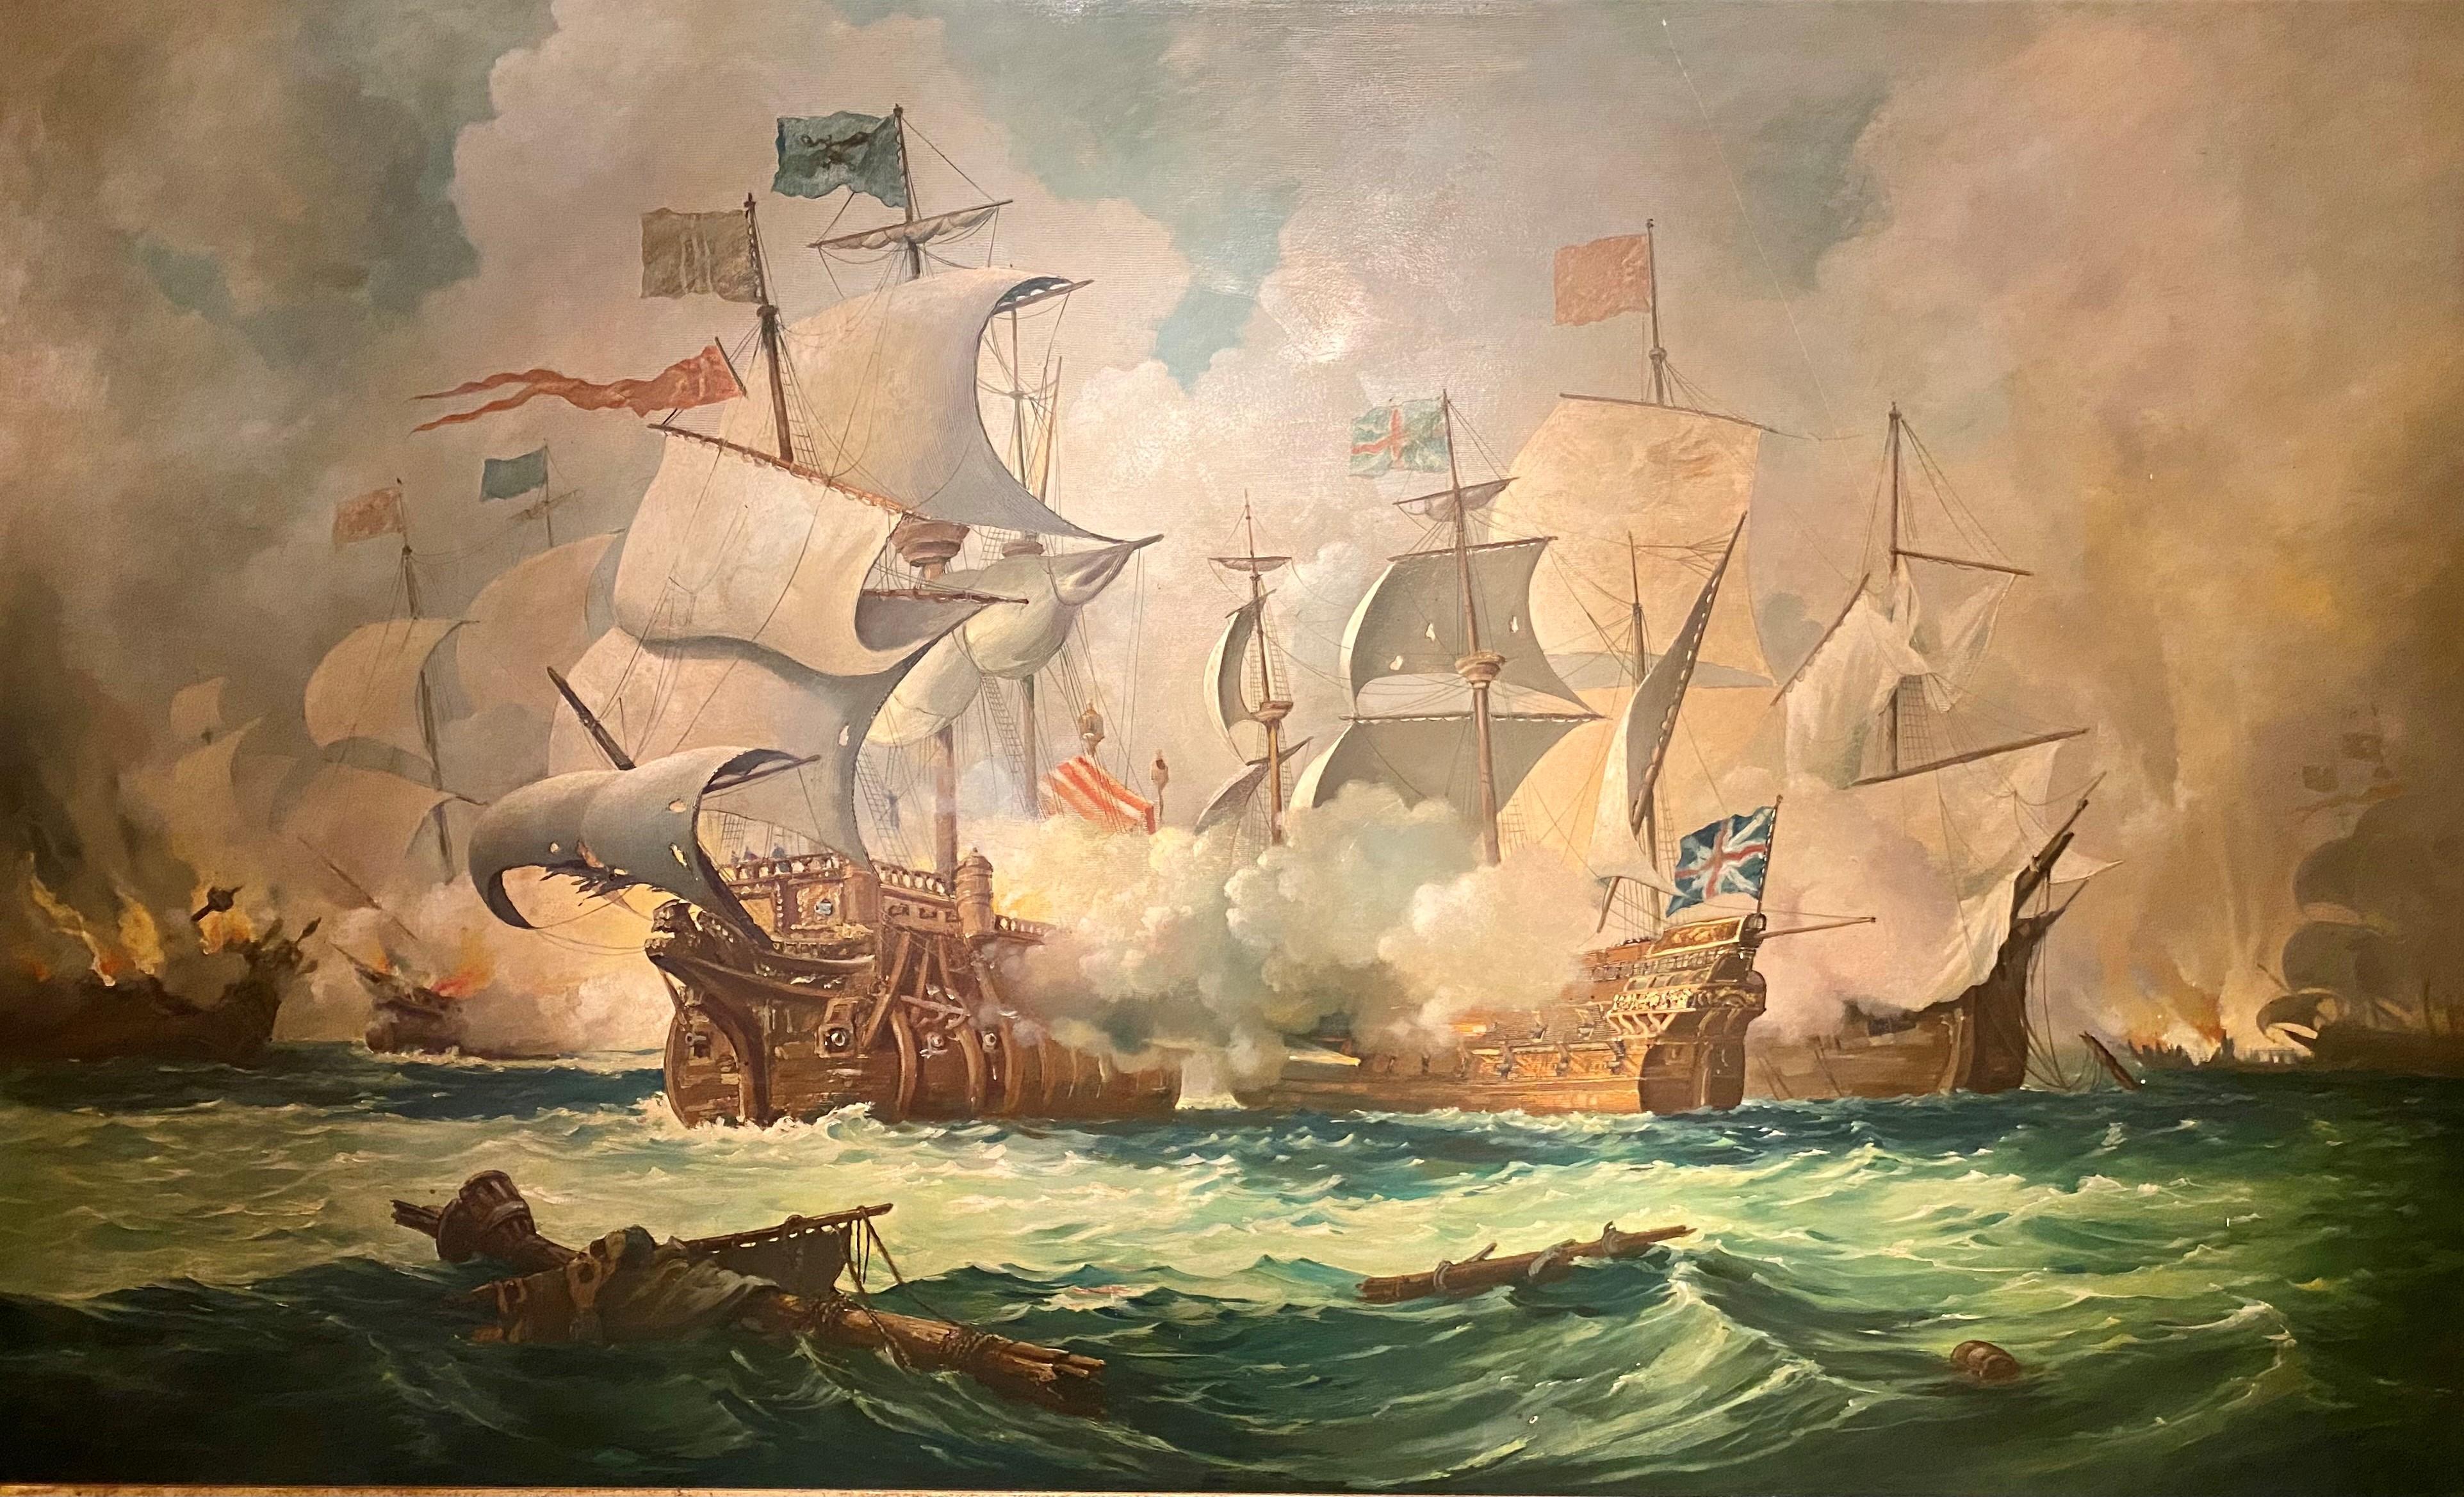 Grand size antique early 20th century framed oil painting of late 18th/early 19th British Royal Navy battle, possibly the battle of Camperdown between the British and Dutch in 1797.
Canvas: 46